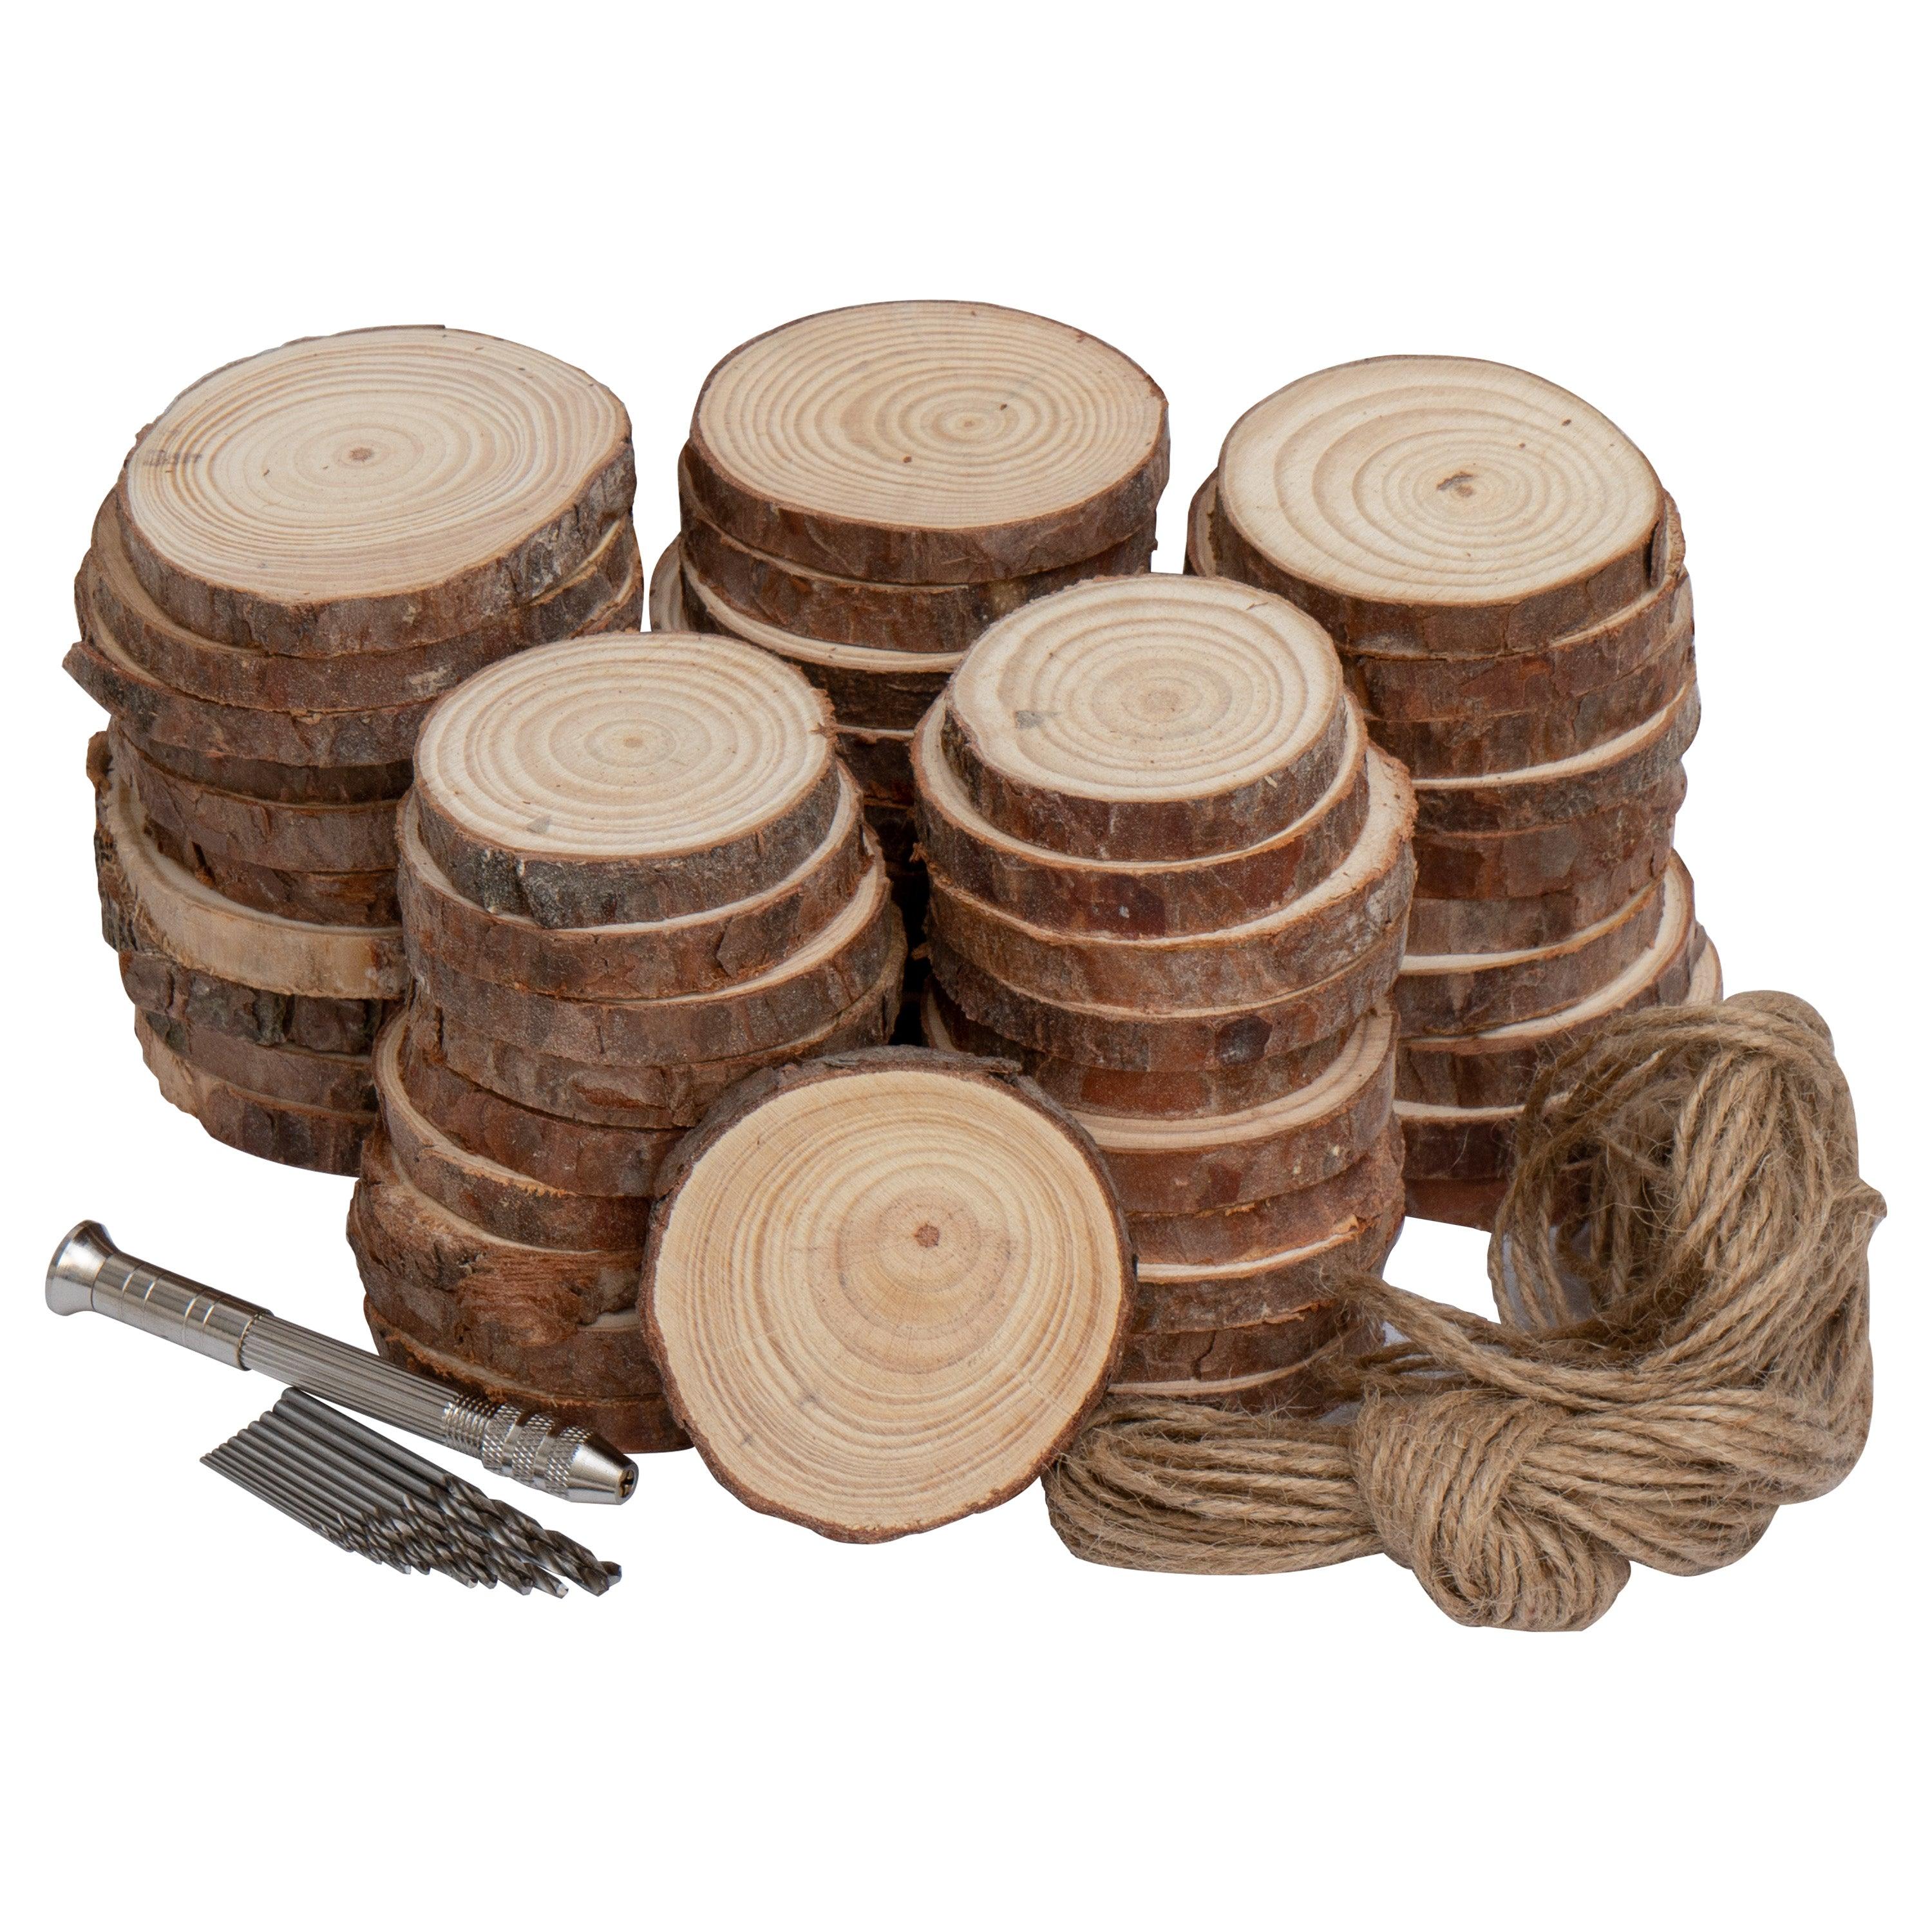 7-11.8inch Unfinished Natural Wood Slices with Tree Bark Round